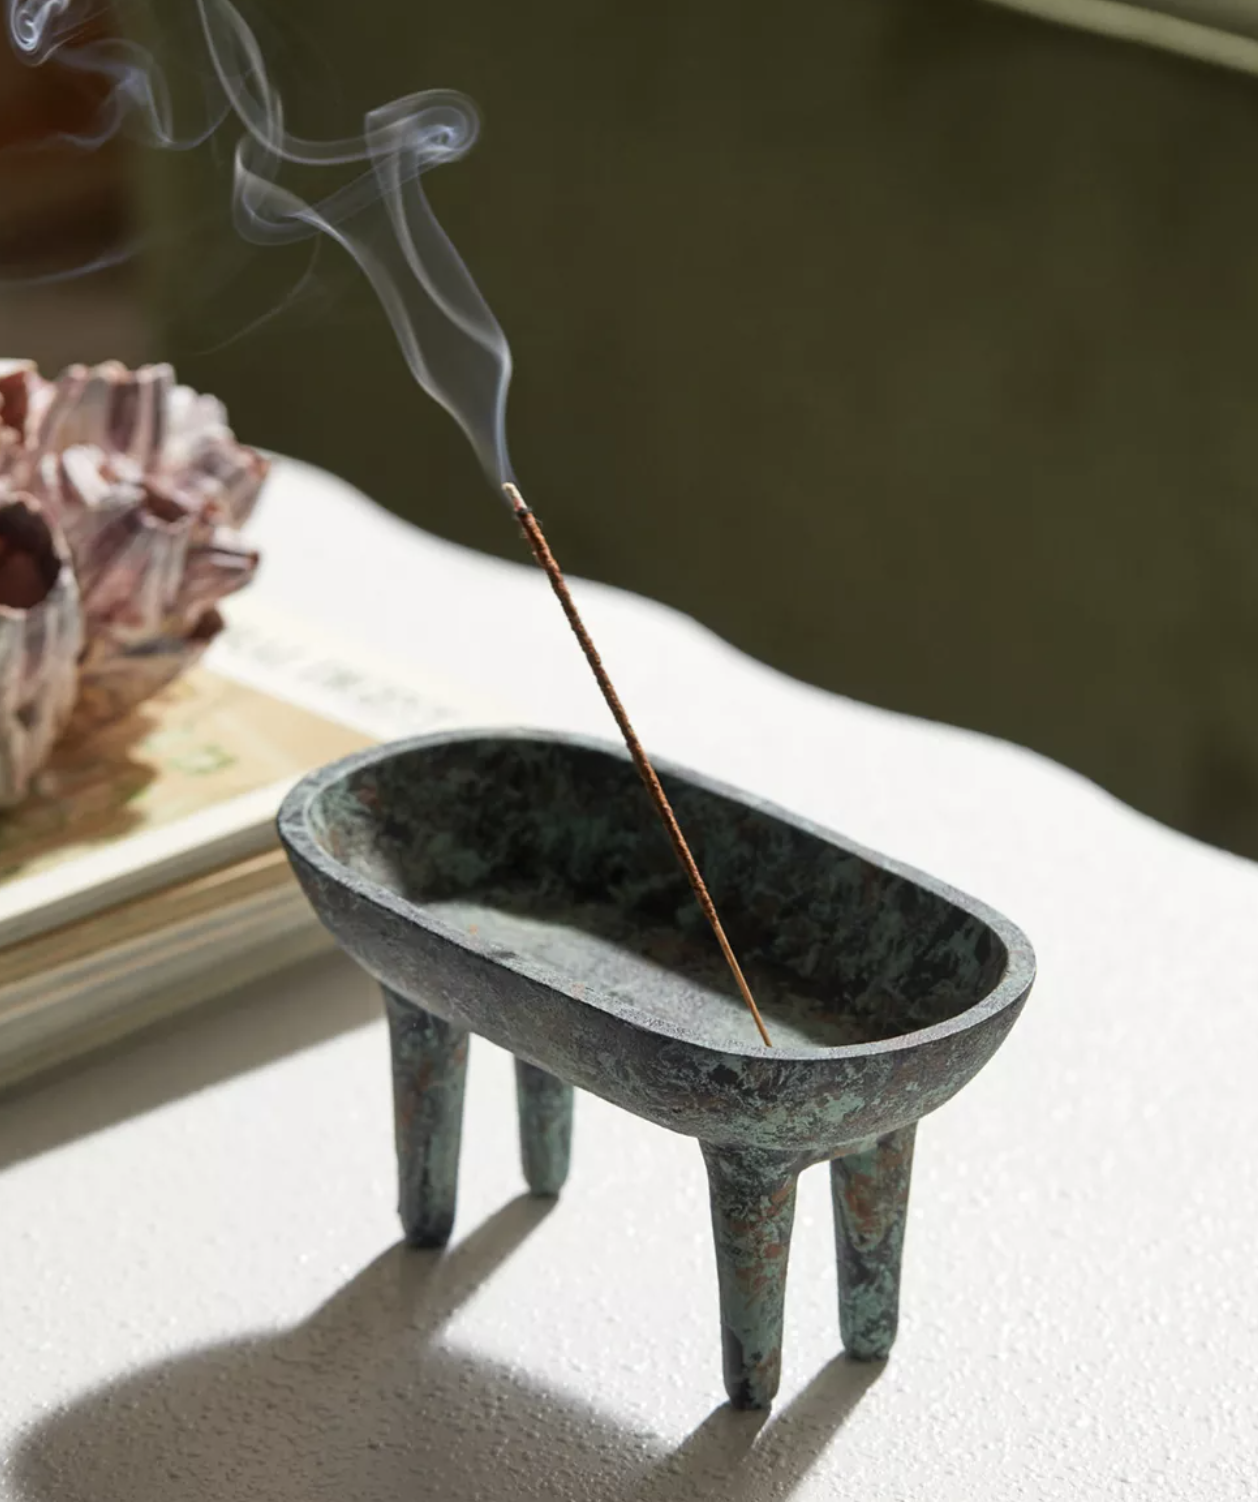 The incense holder with a stick of incense in it